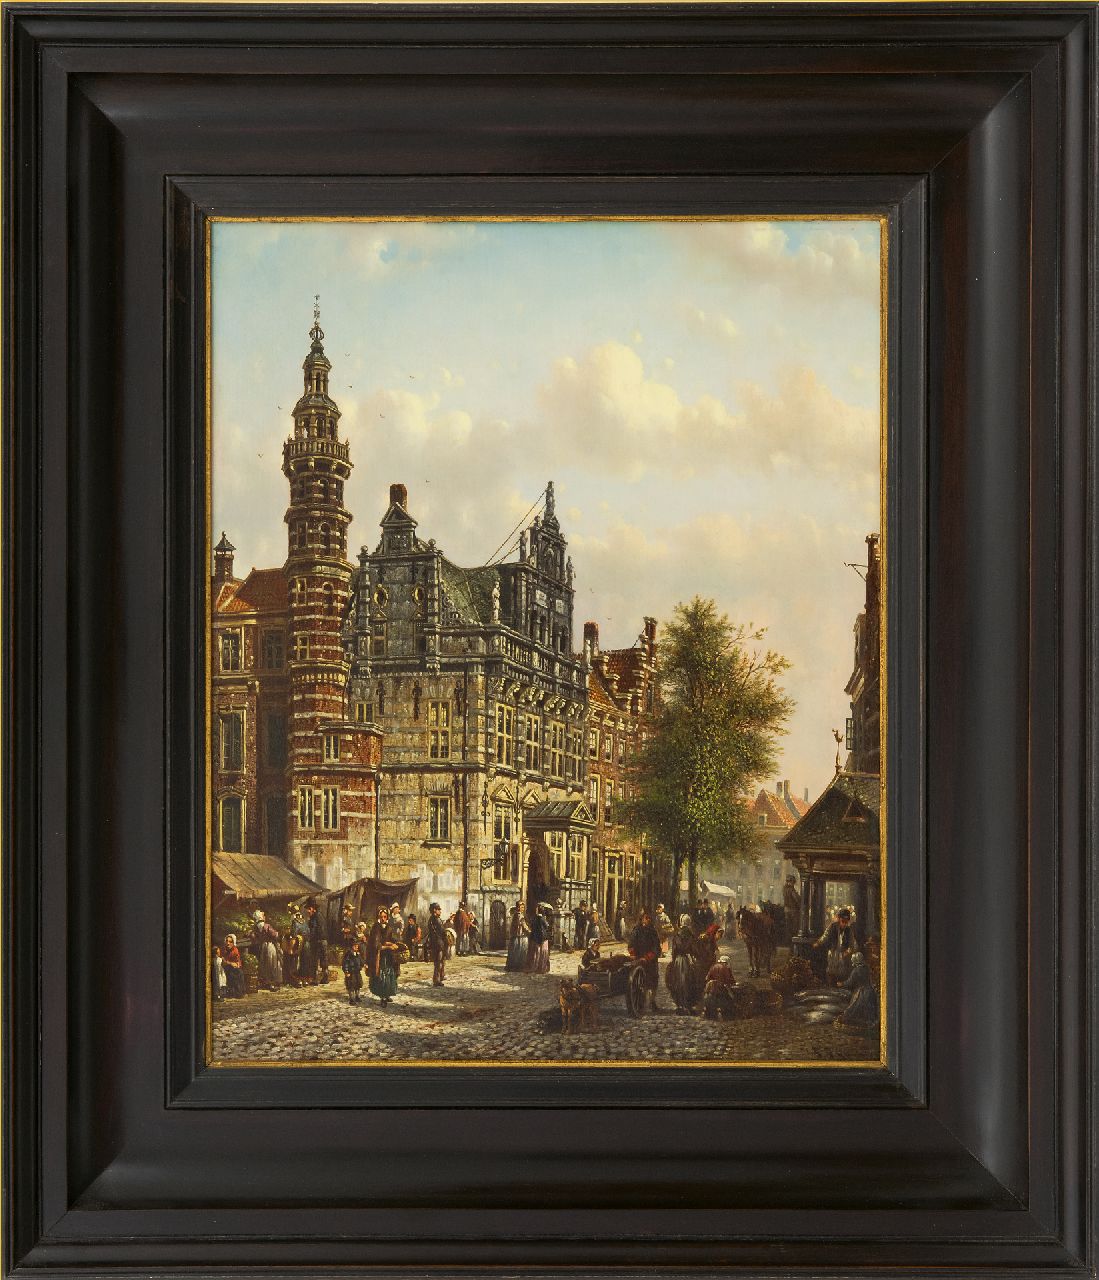 Spohler J.F.  | Johannes Franciscus Spohler | Paintings offered for sale | The Old City Hall of The Hague on the Groenmarkt, oil on panel 40.0 x 32.9 cm, signed l.r.